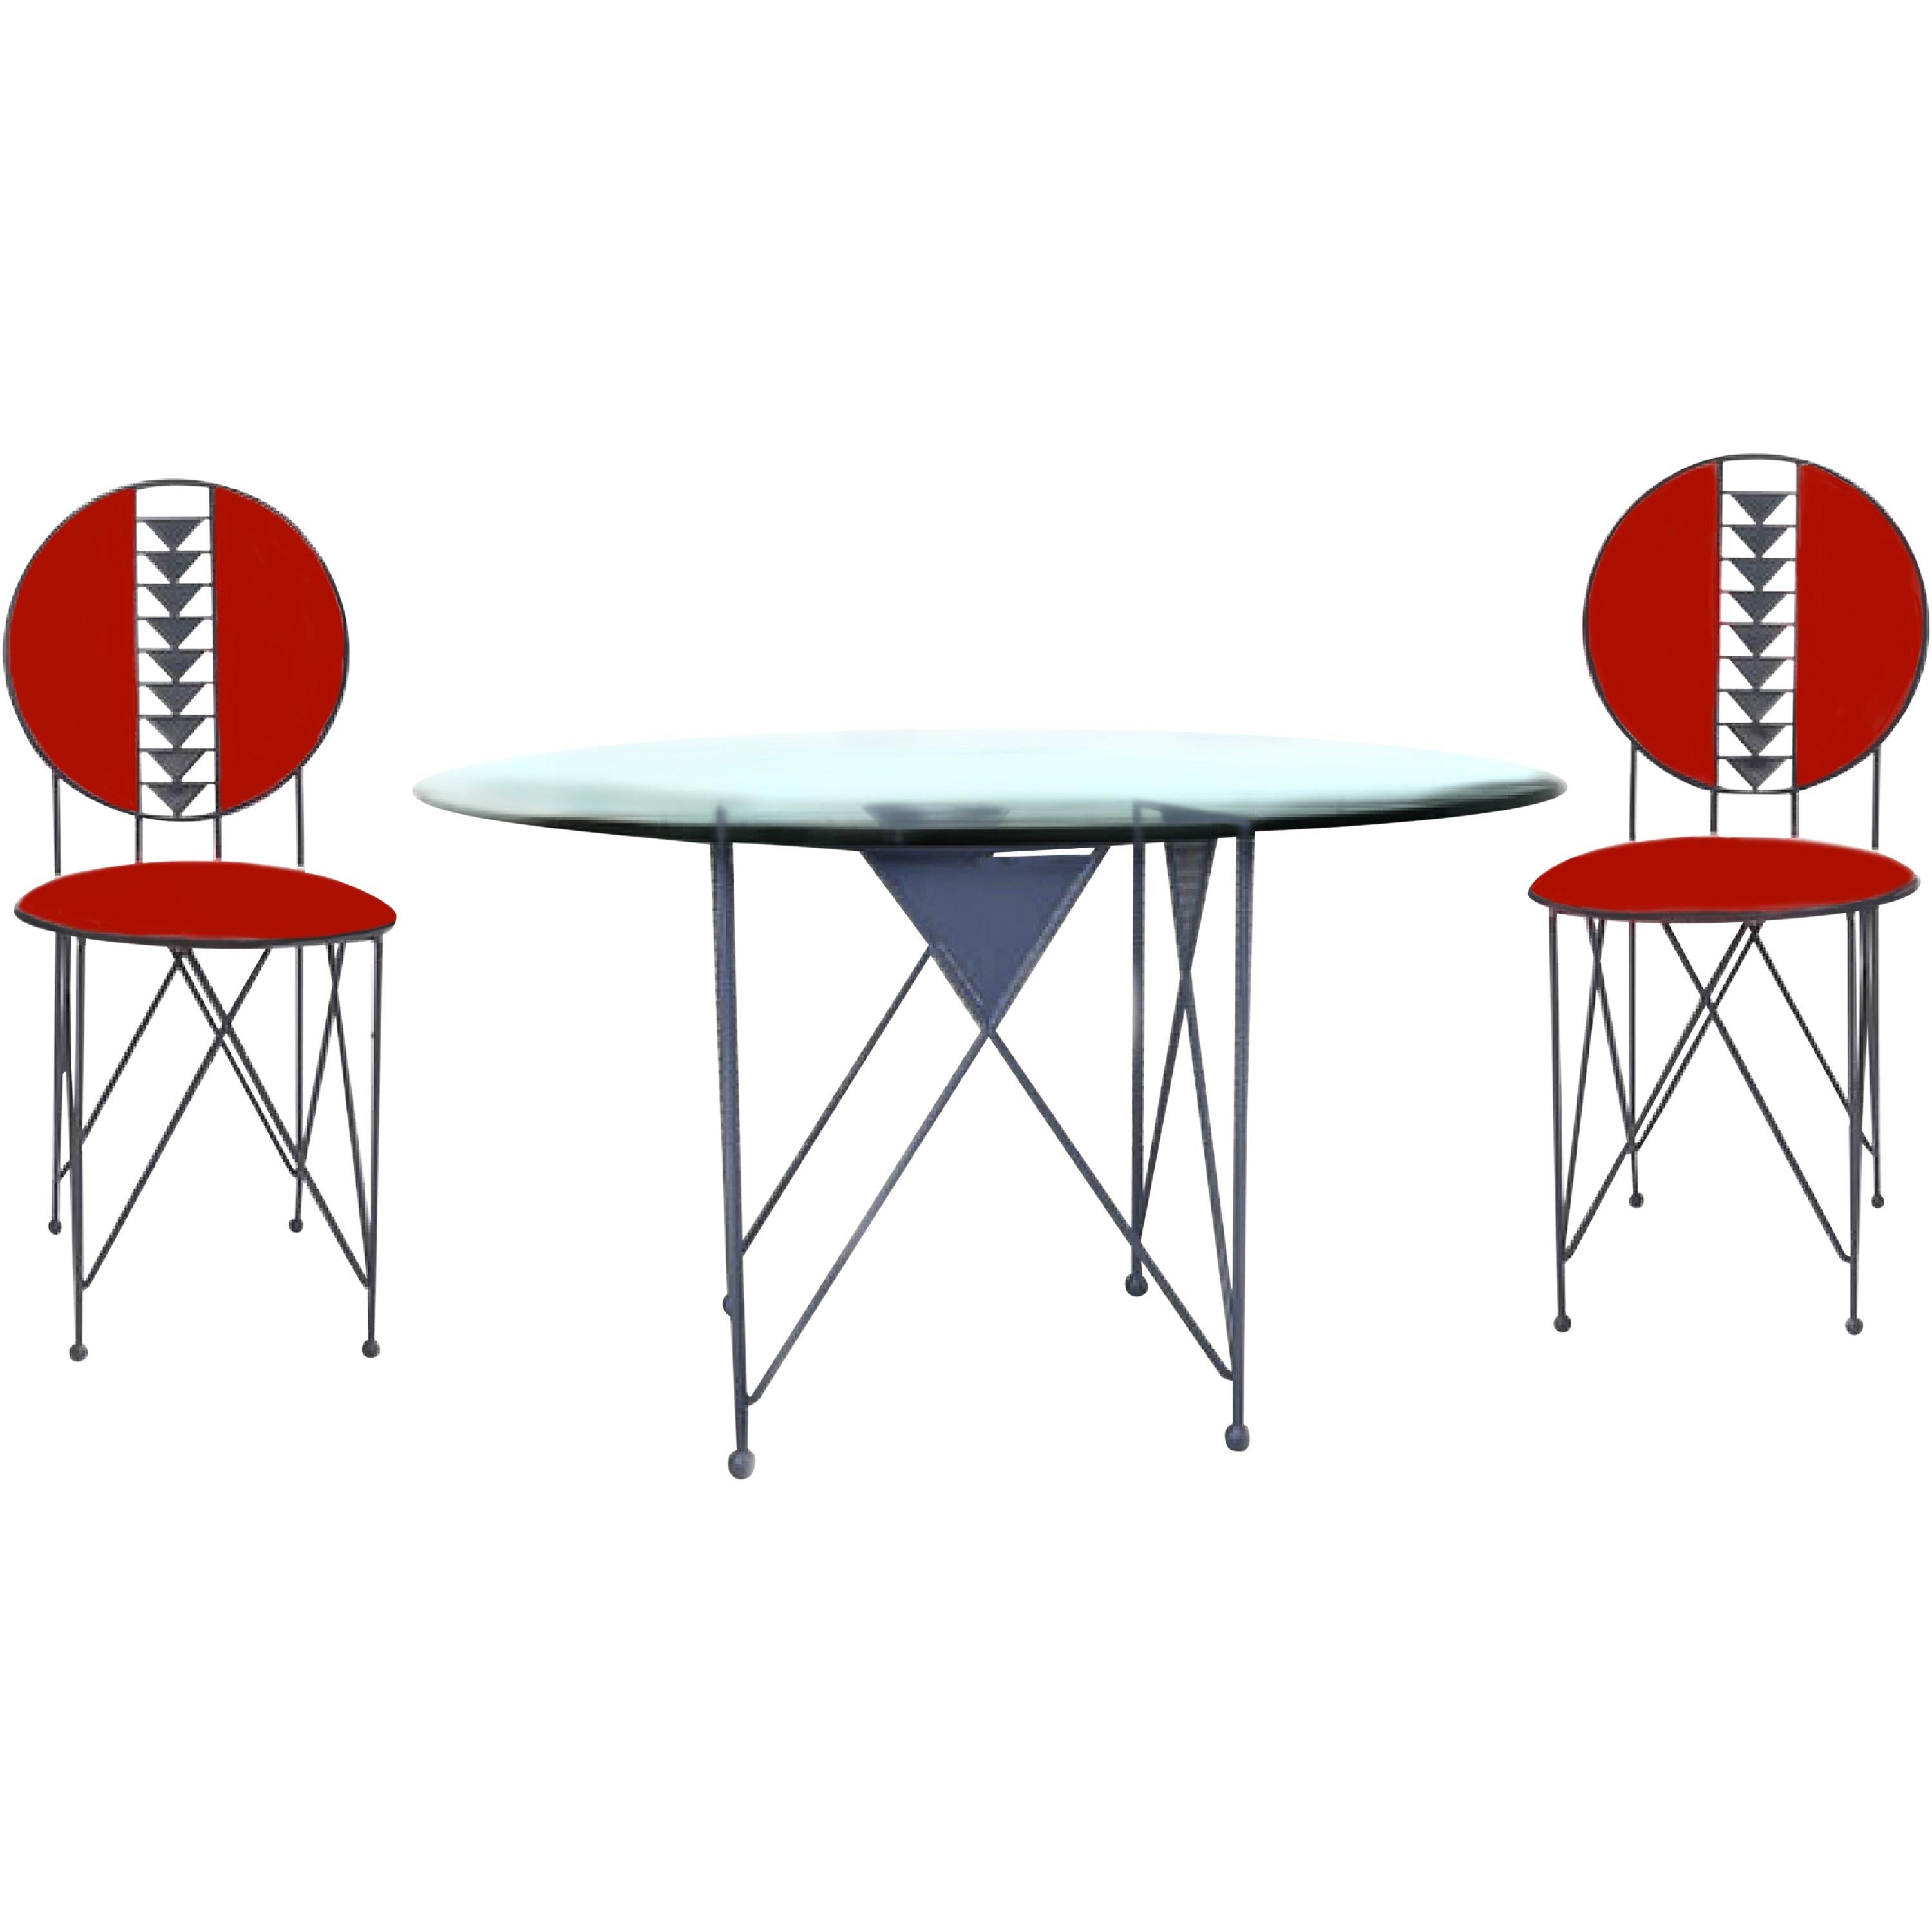 Frank Lloyd Wright Cassina Midway 2 & 3 Enameled Steel Dining Set Gray Red Round